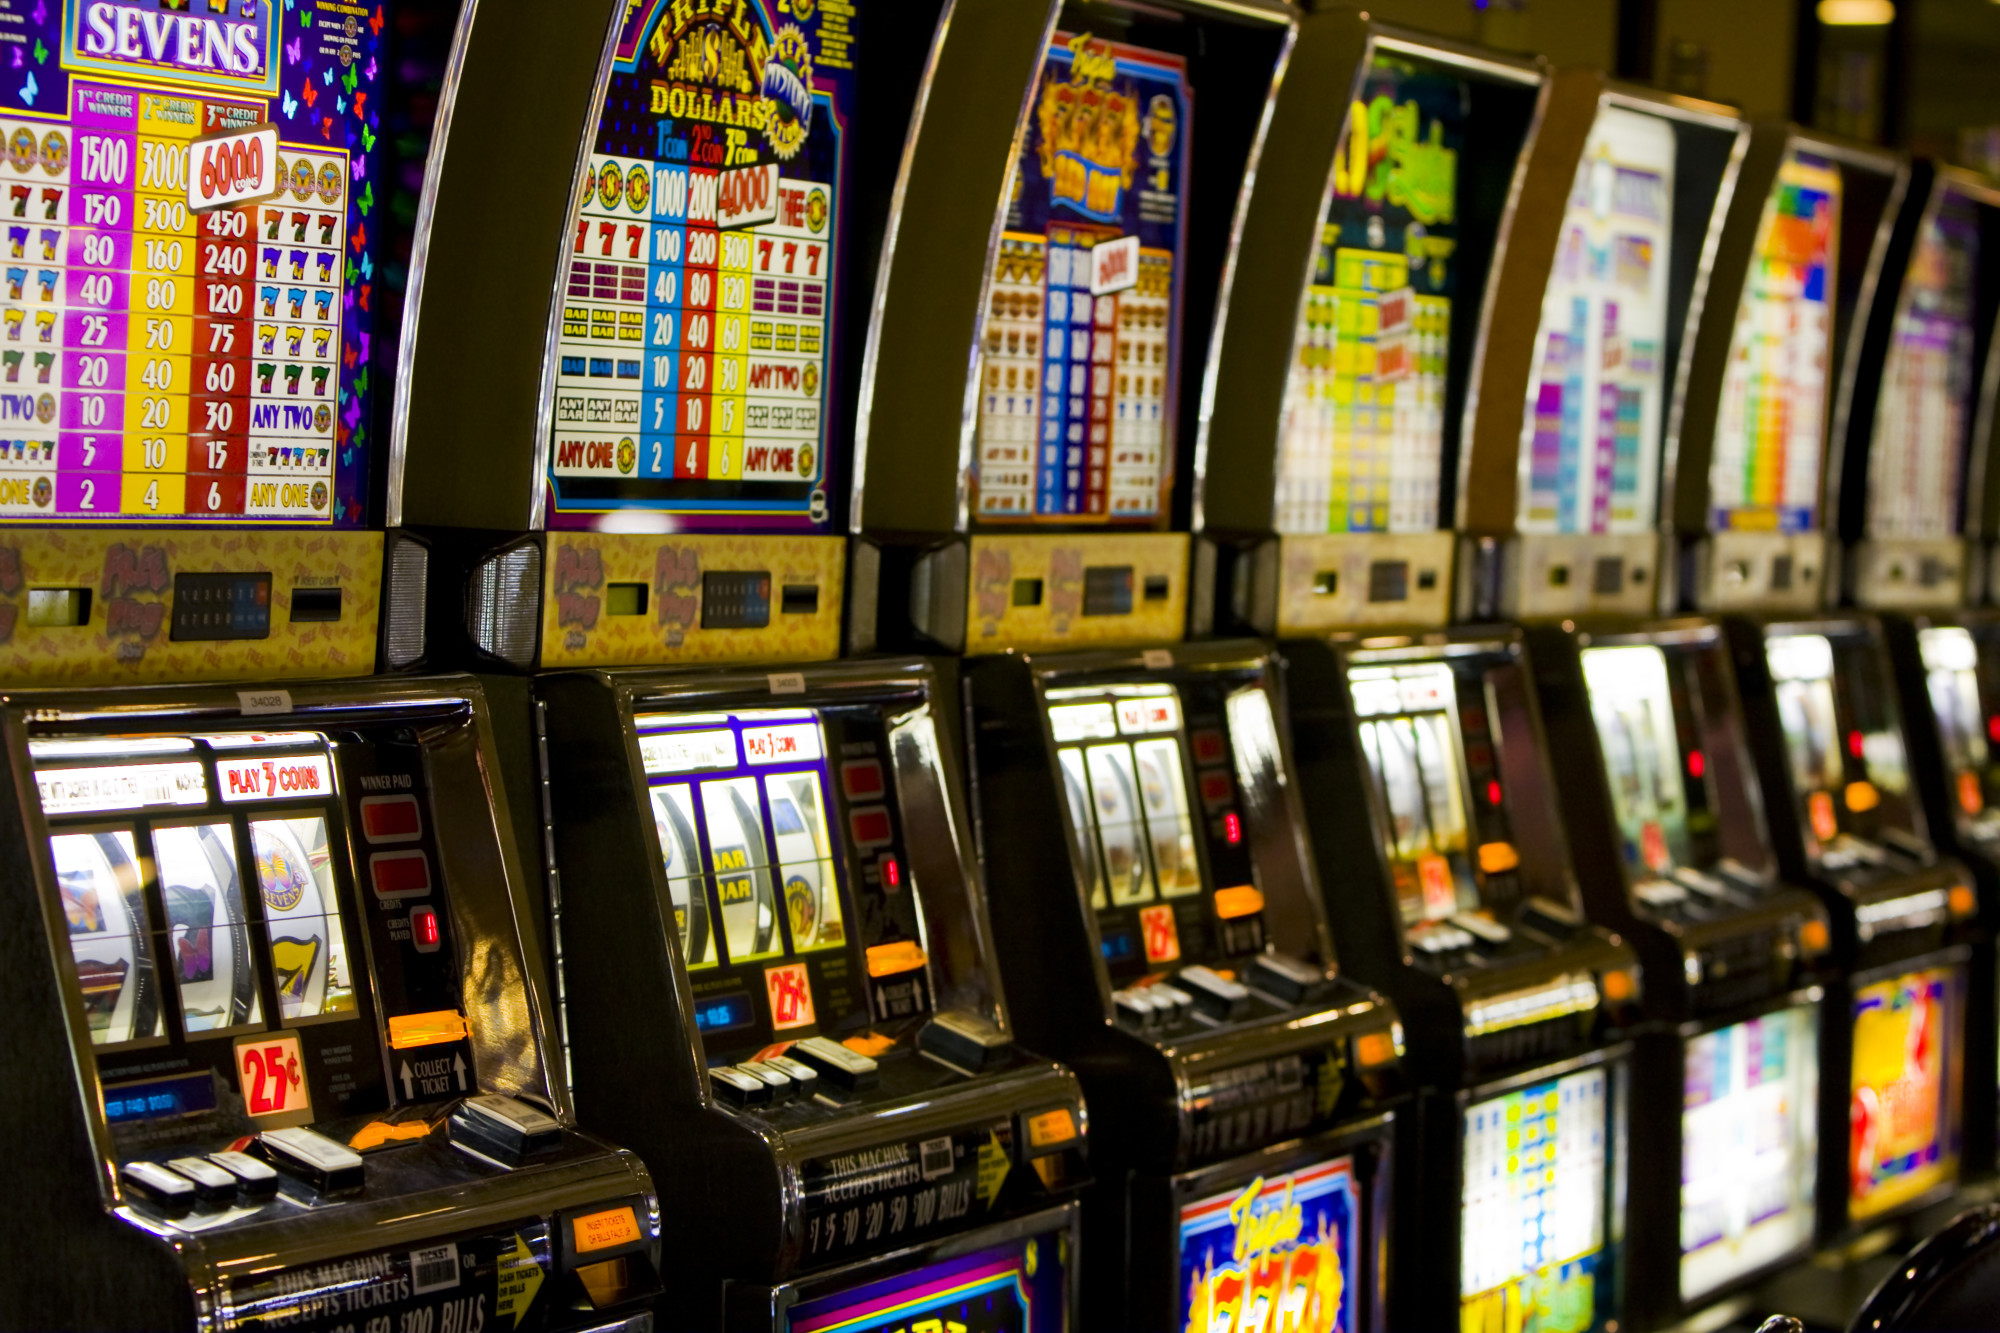 how to find the winning slot machine